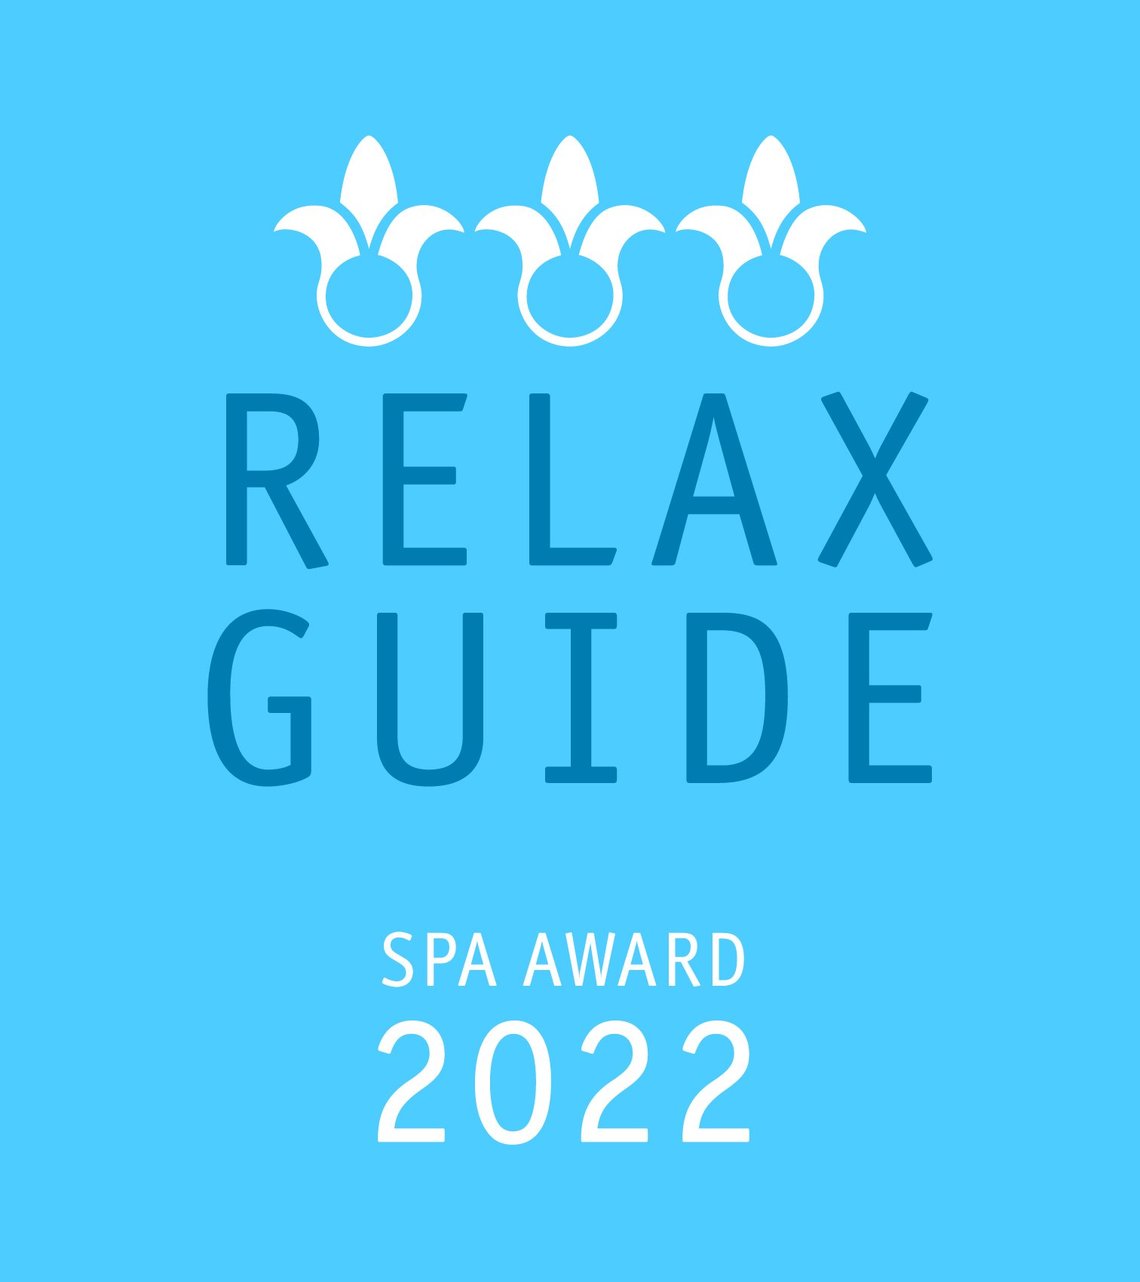 Relax Guide 2022